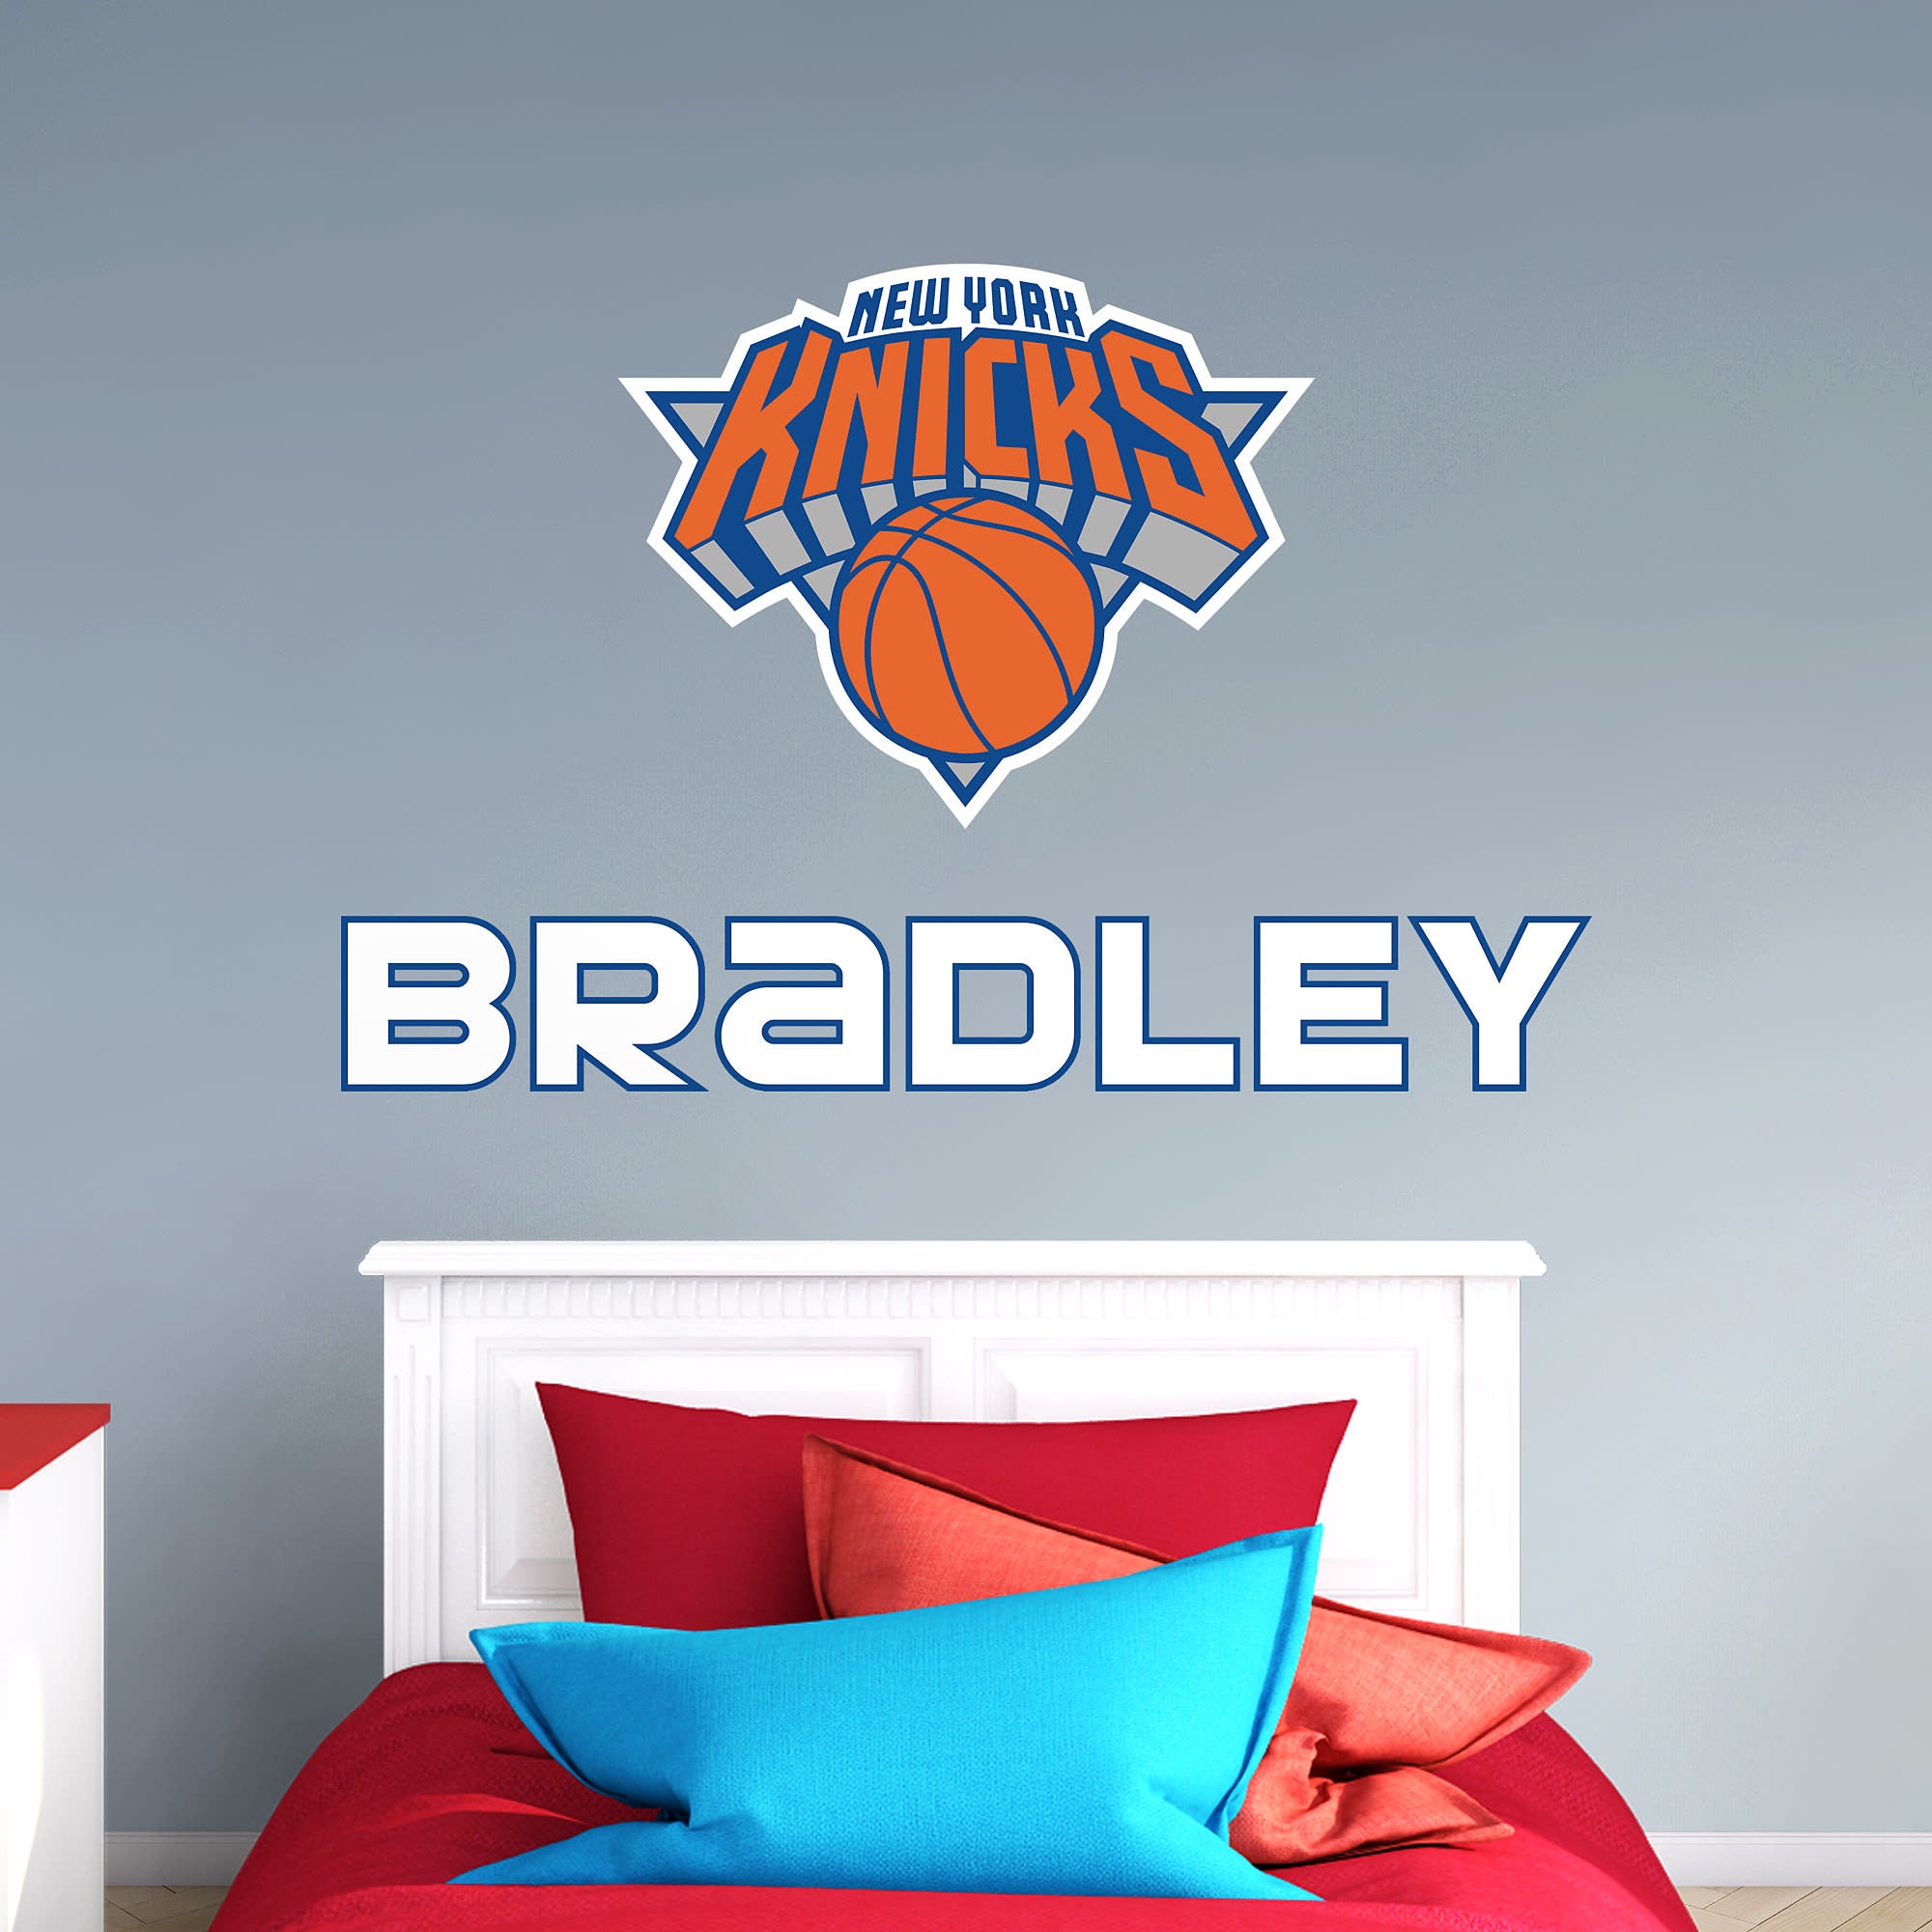 New York Knicks: Stacked Personalized Name - Officially Licensed NBA Transfer Decal in White (52"W x 39.5"H) by Fathead | Vinyl